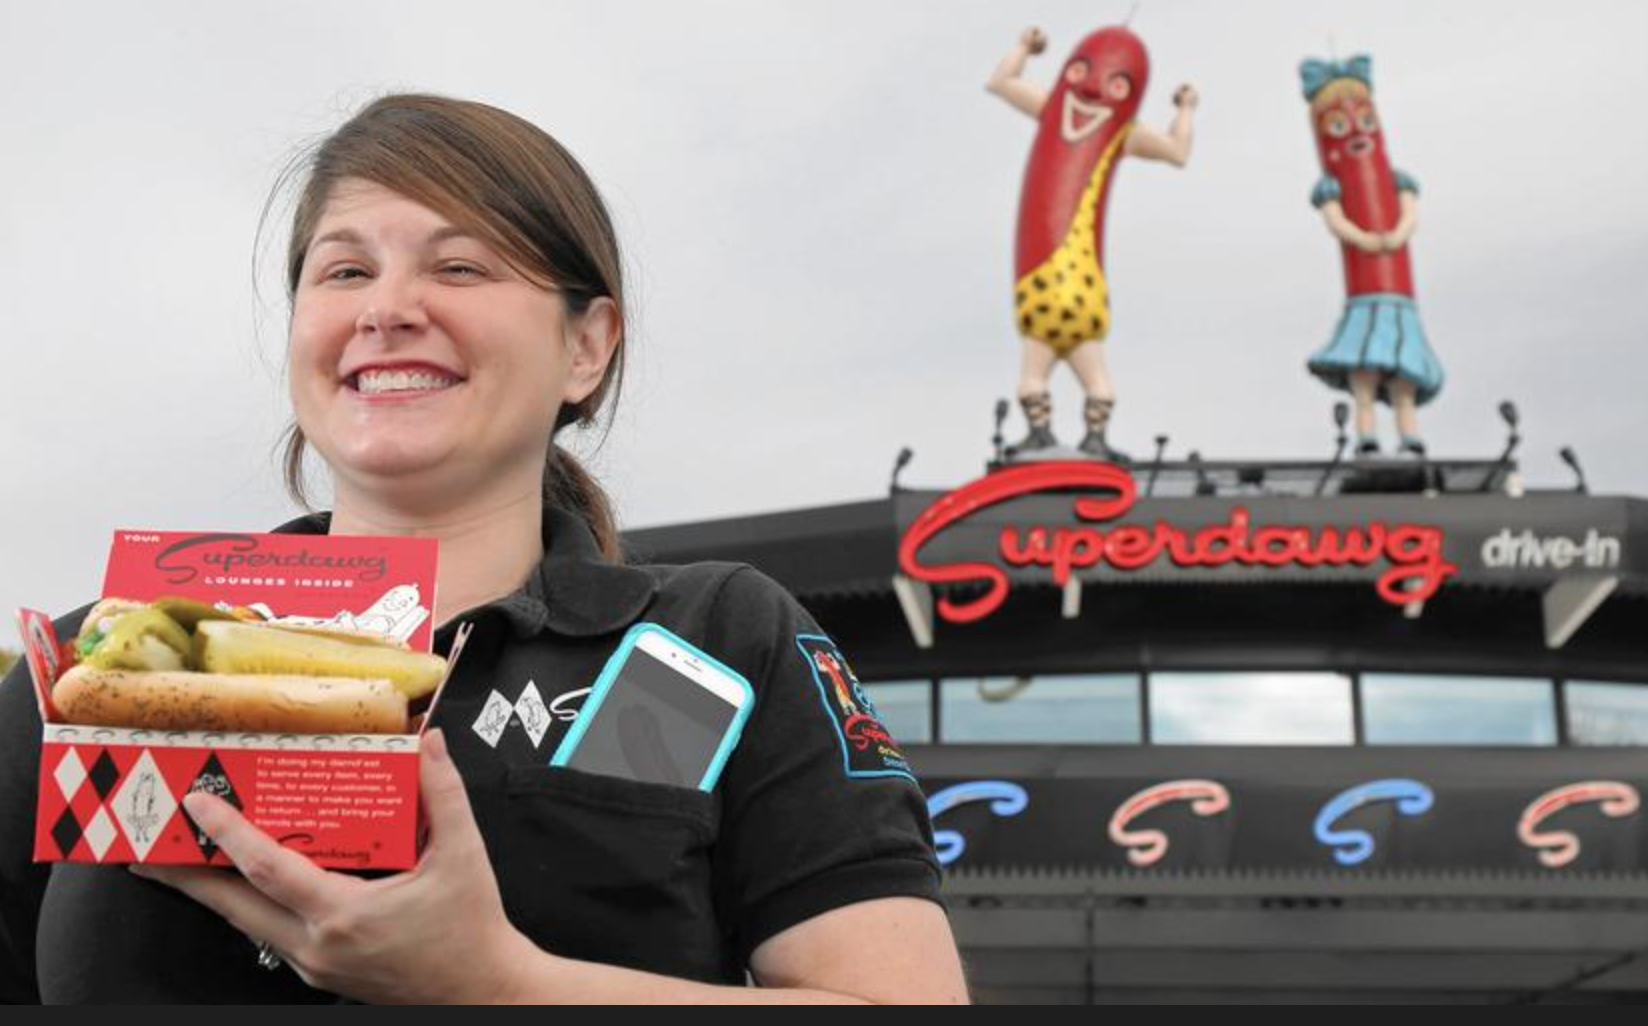 B Superdawg stand